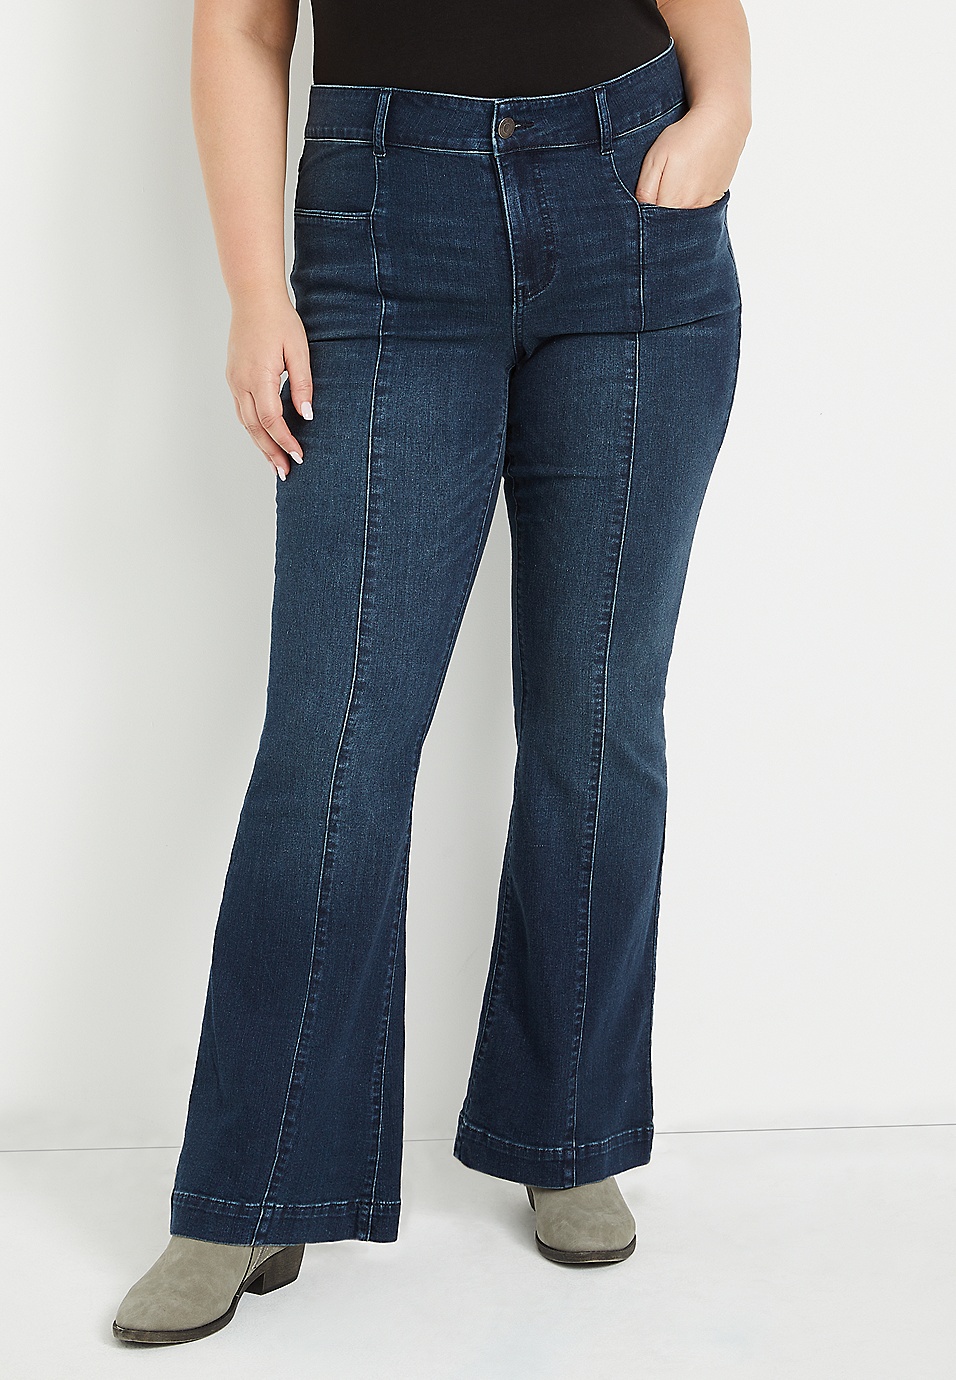 m jeans by maurices™ Flare High Rise Front Seam Jean